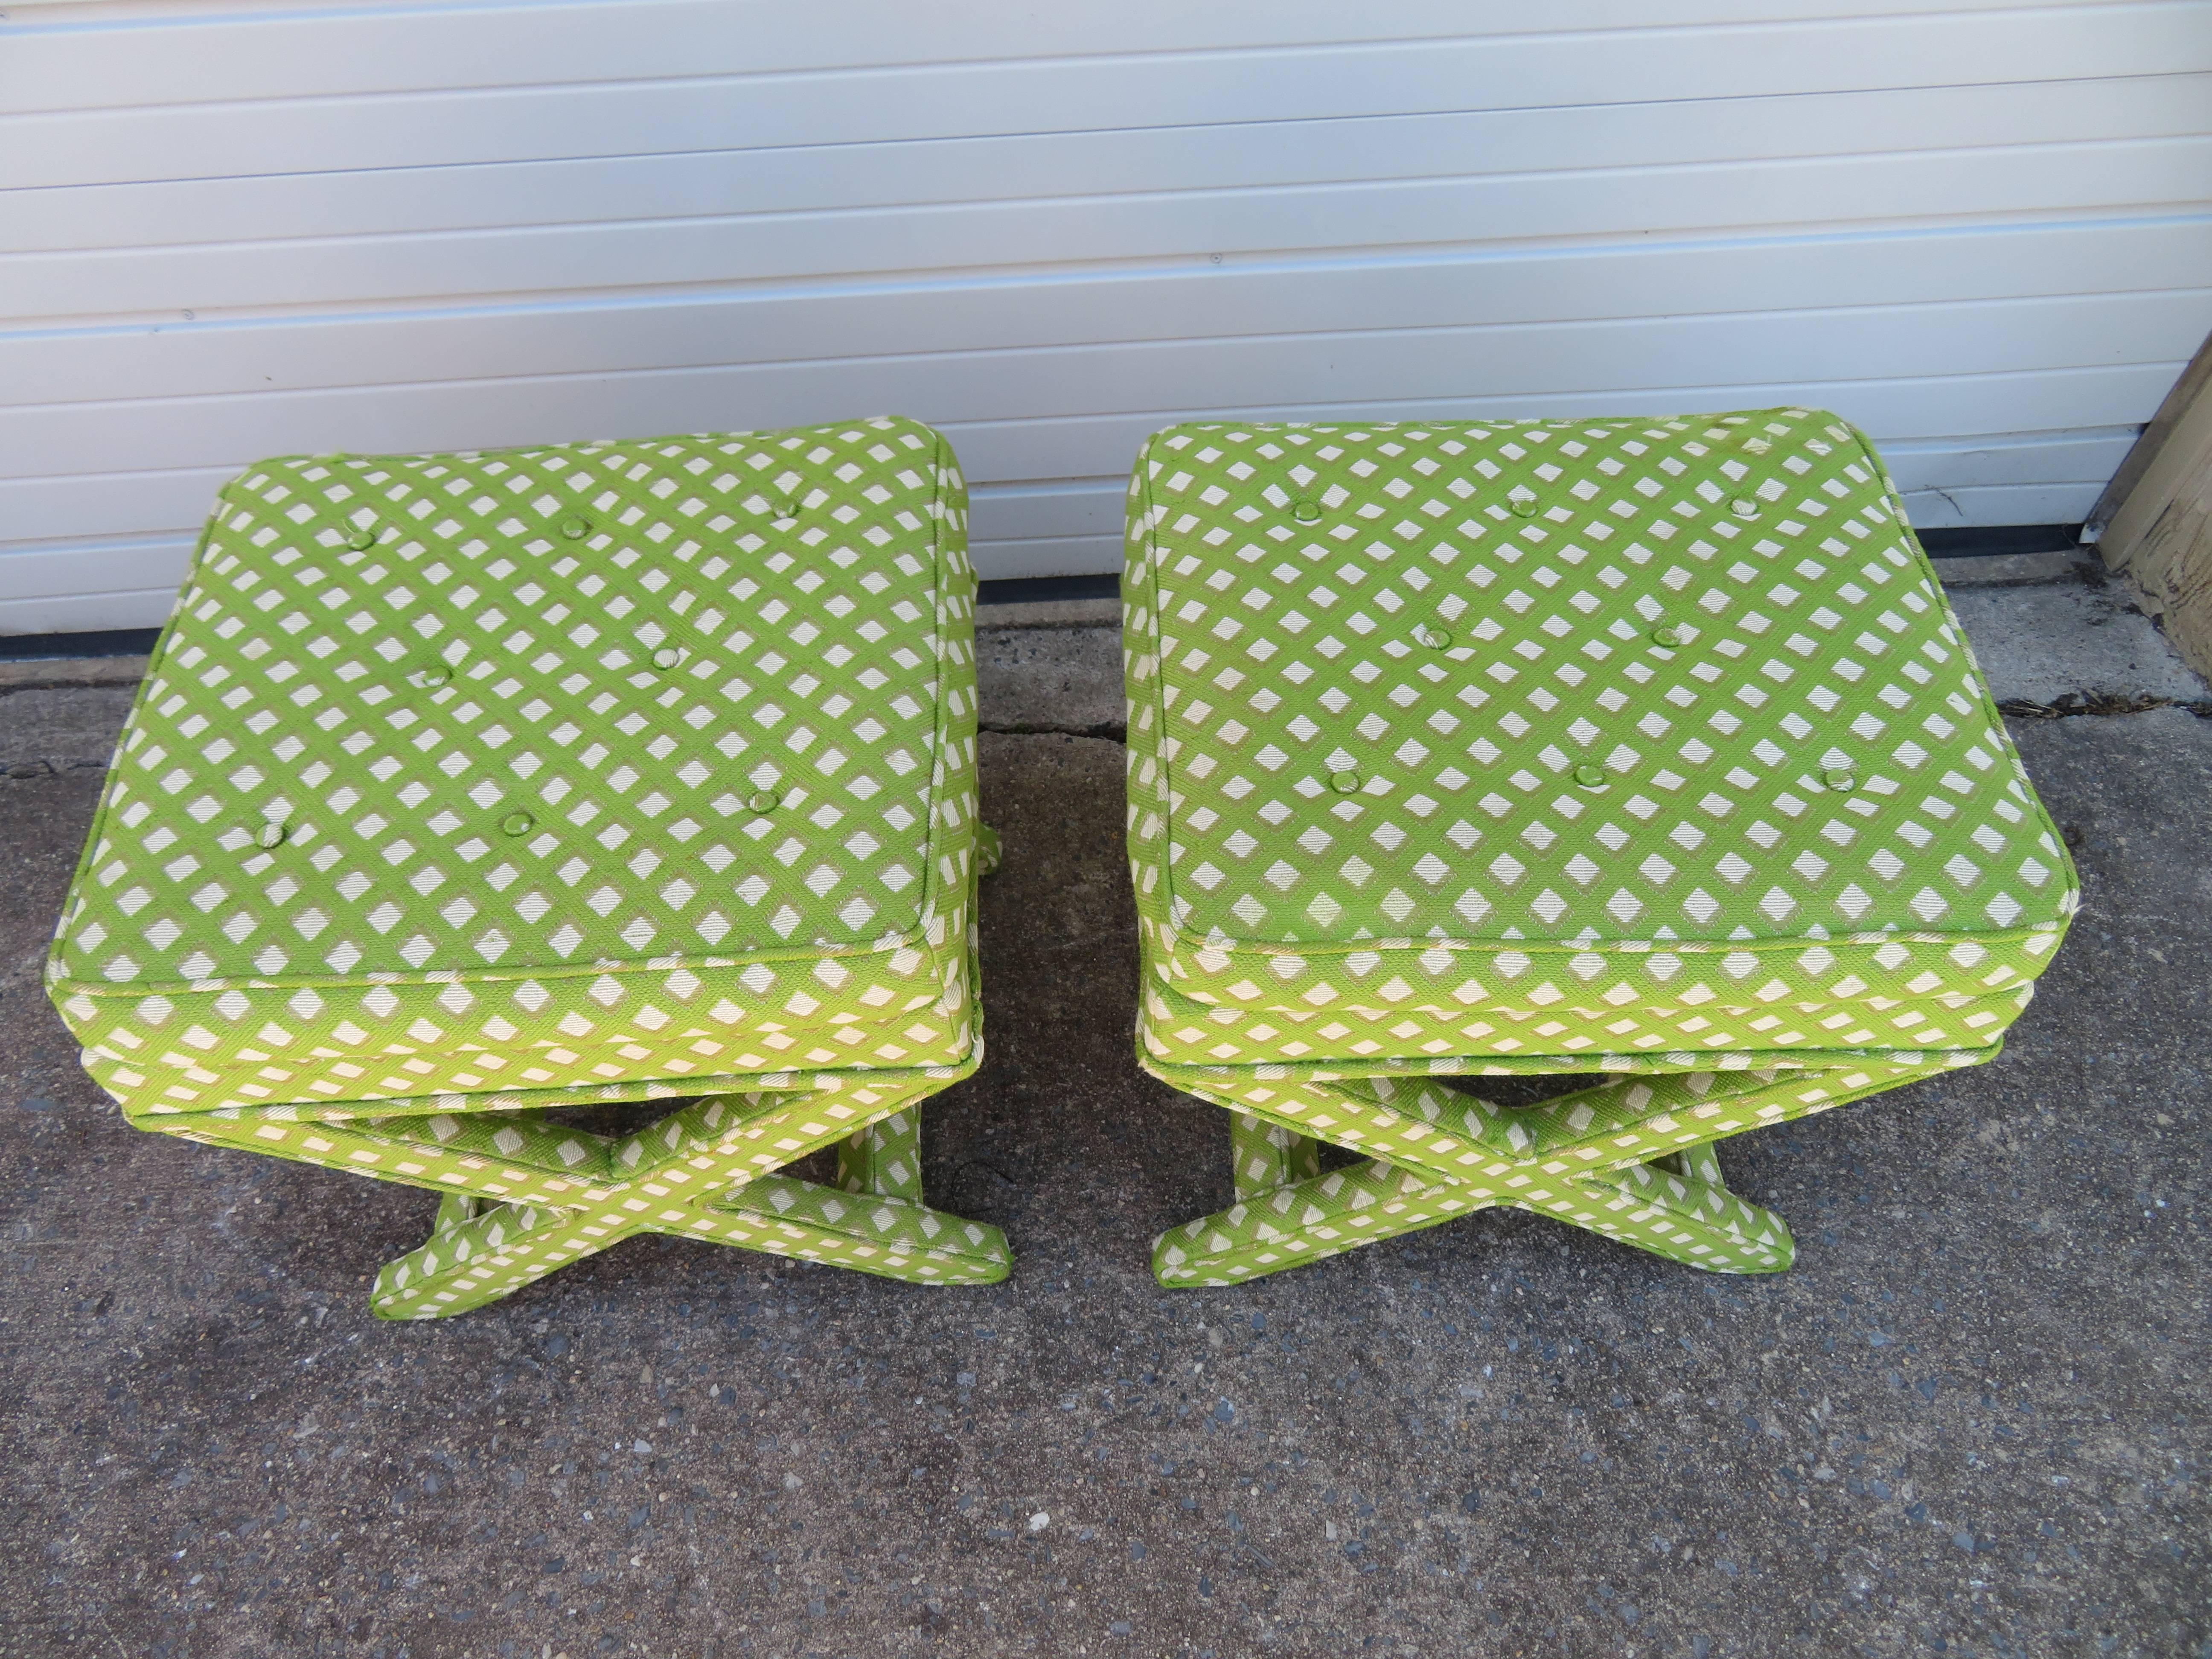 Pair of Billy Baldwin ottoman or benches with X-bases and thick top cushion. Stools have a tufted top cushion with vintage lattice weave green and white upholstery.